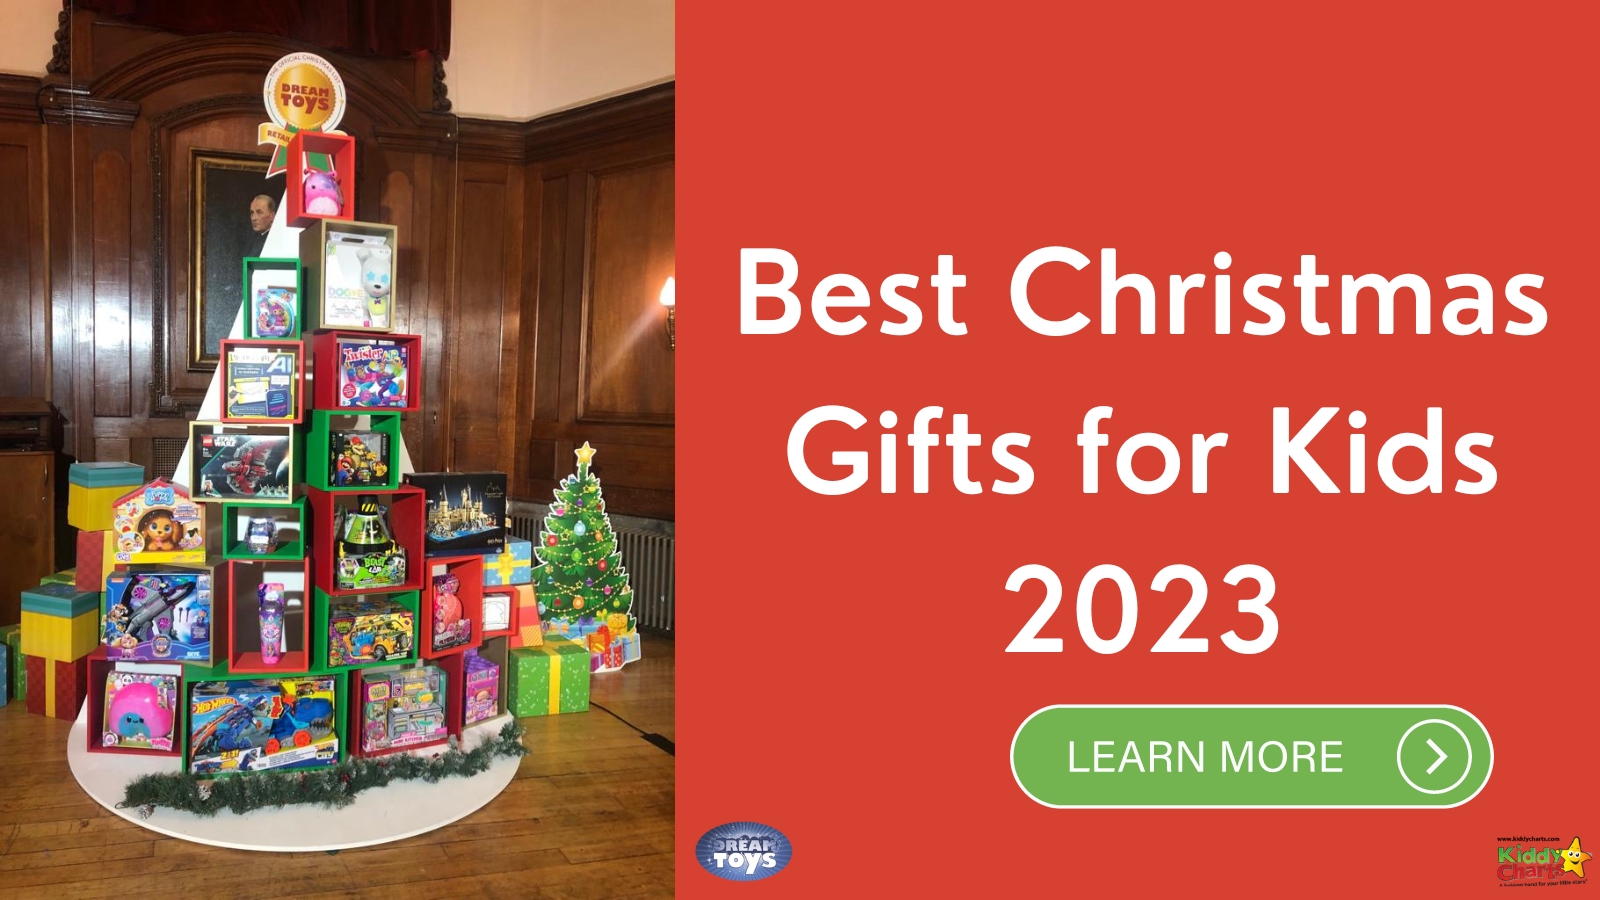 Best Christmas gifts for kids in 2023: Dreamtoys